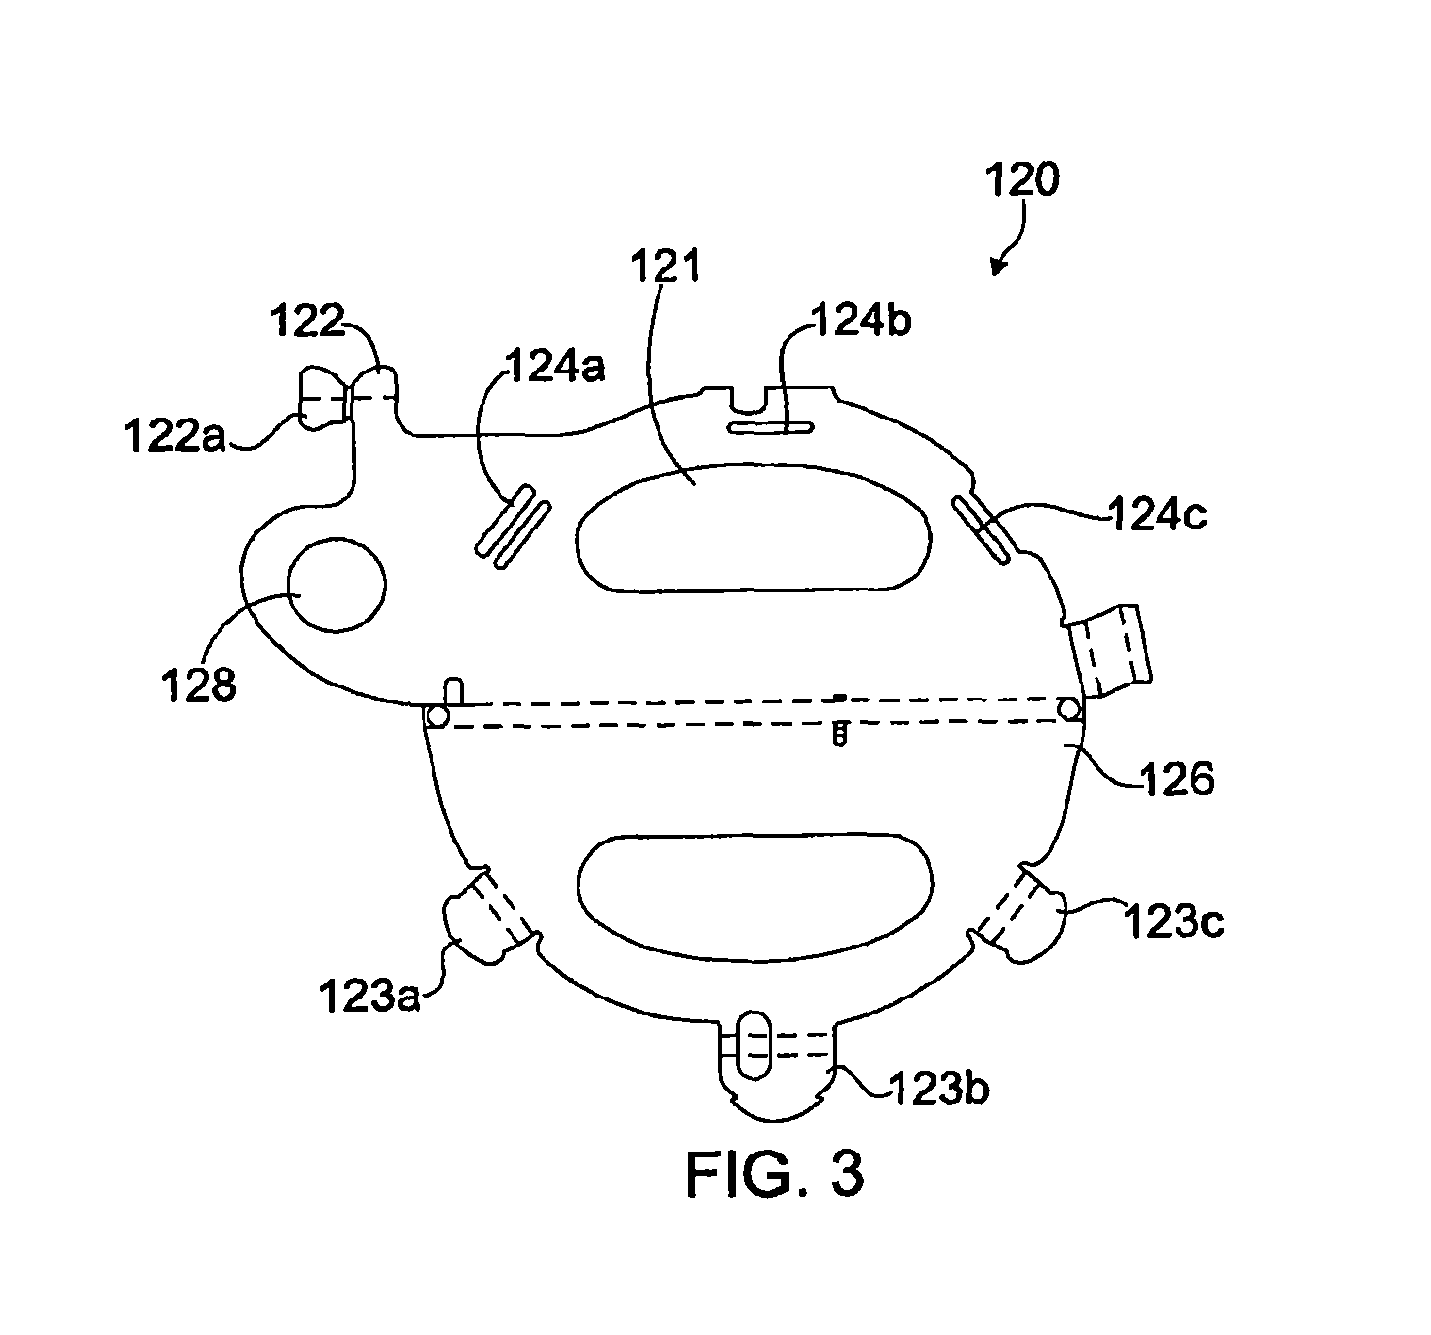 Apparatus, system, and method of shielding the sharp tip of a transseptal guidewire